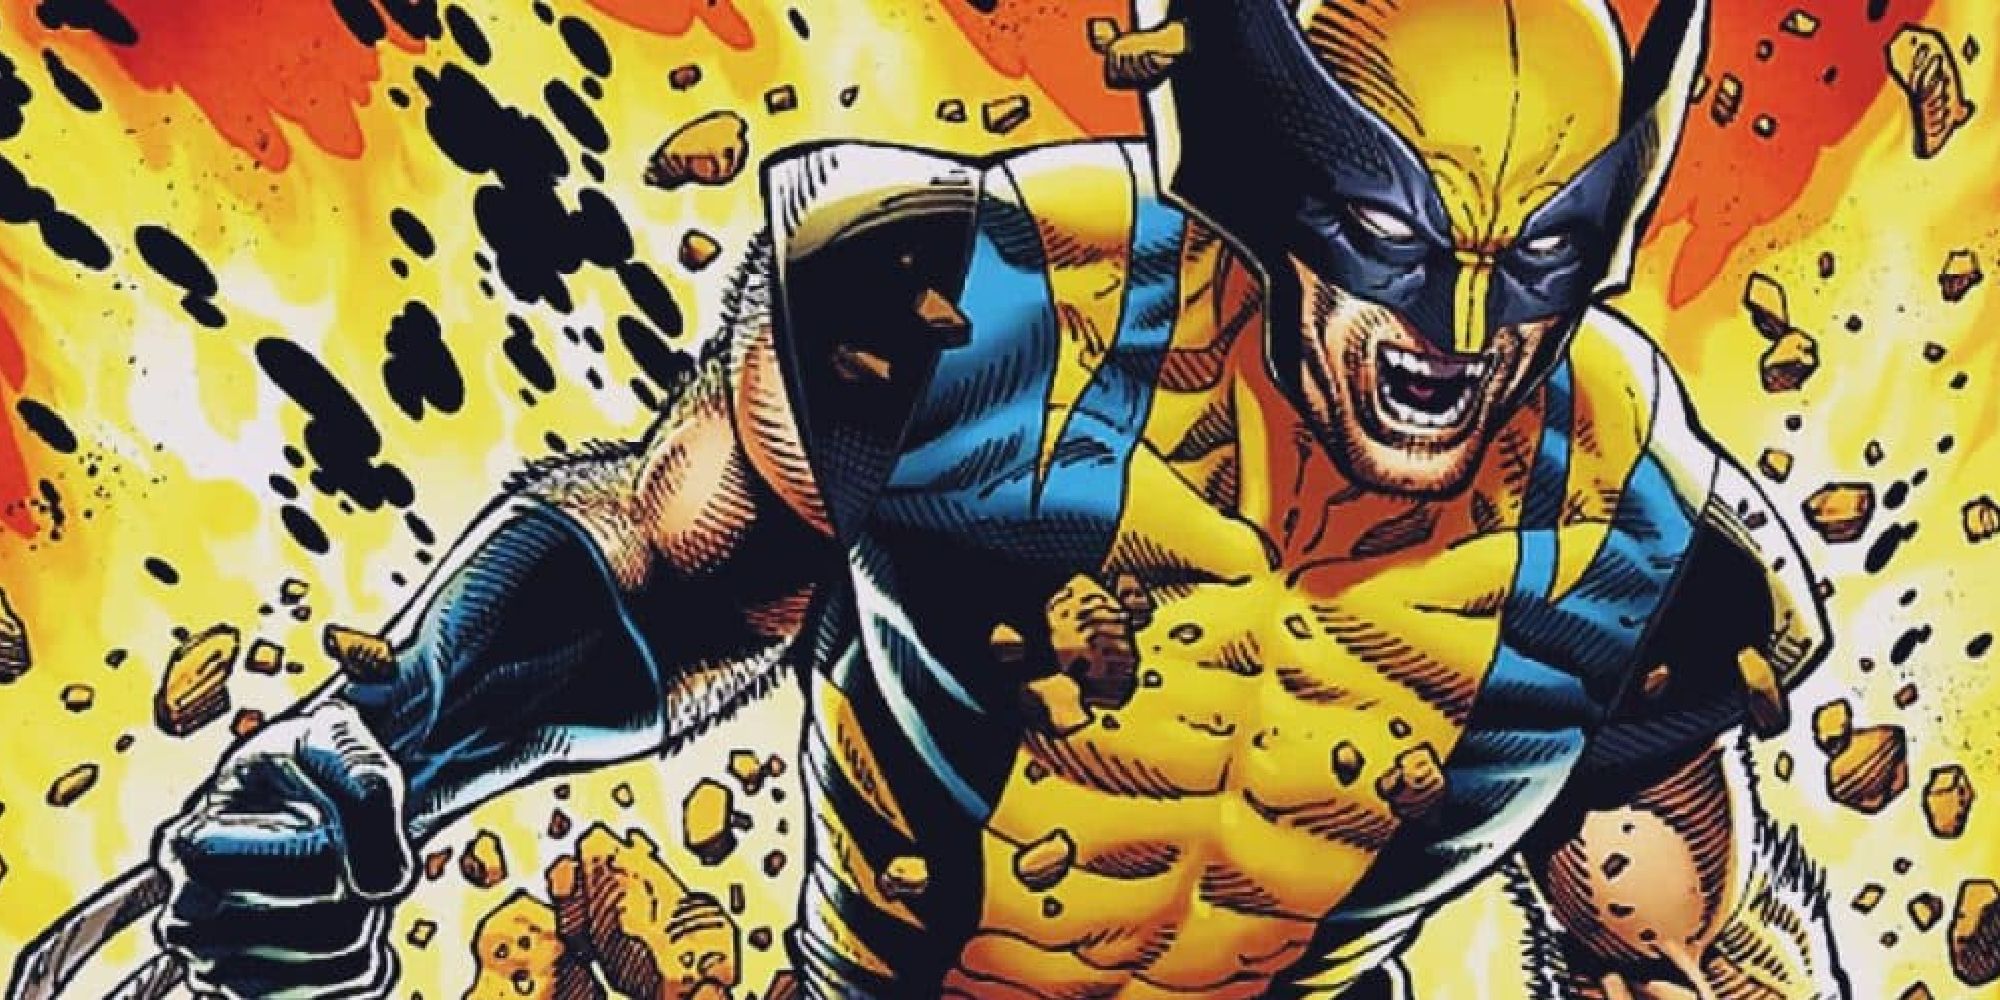 Wolverine in his yellow-and-blue costume, surrounded by exploding rocks